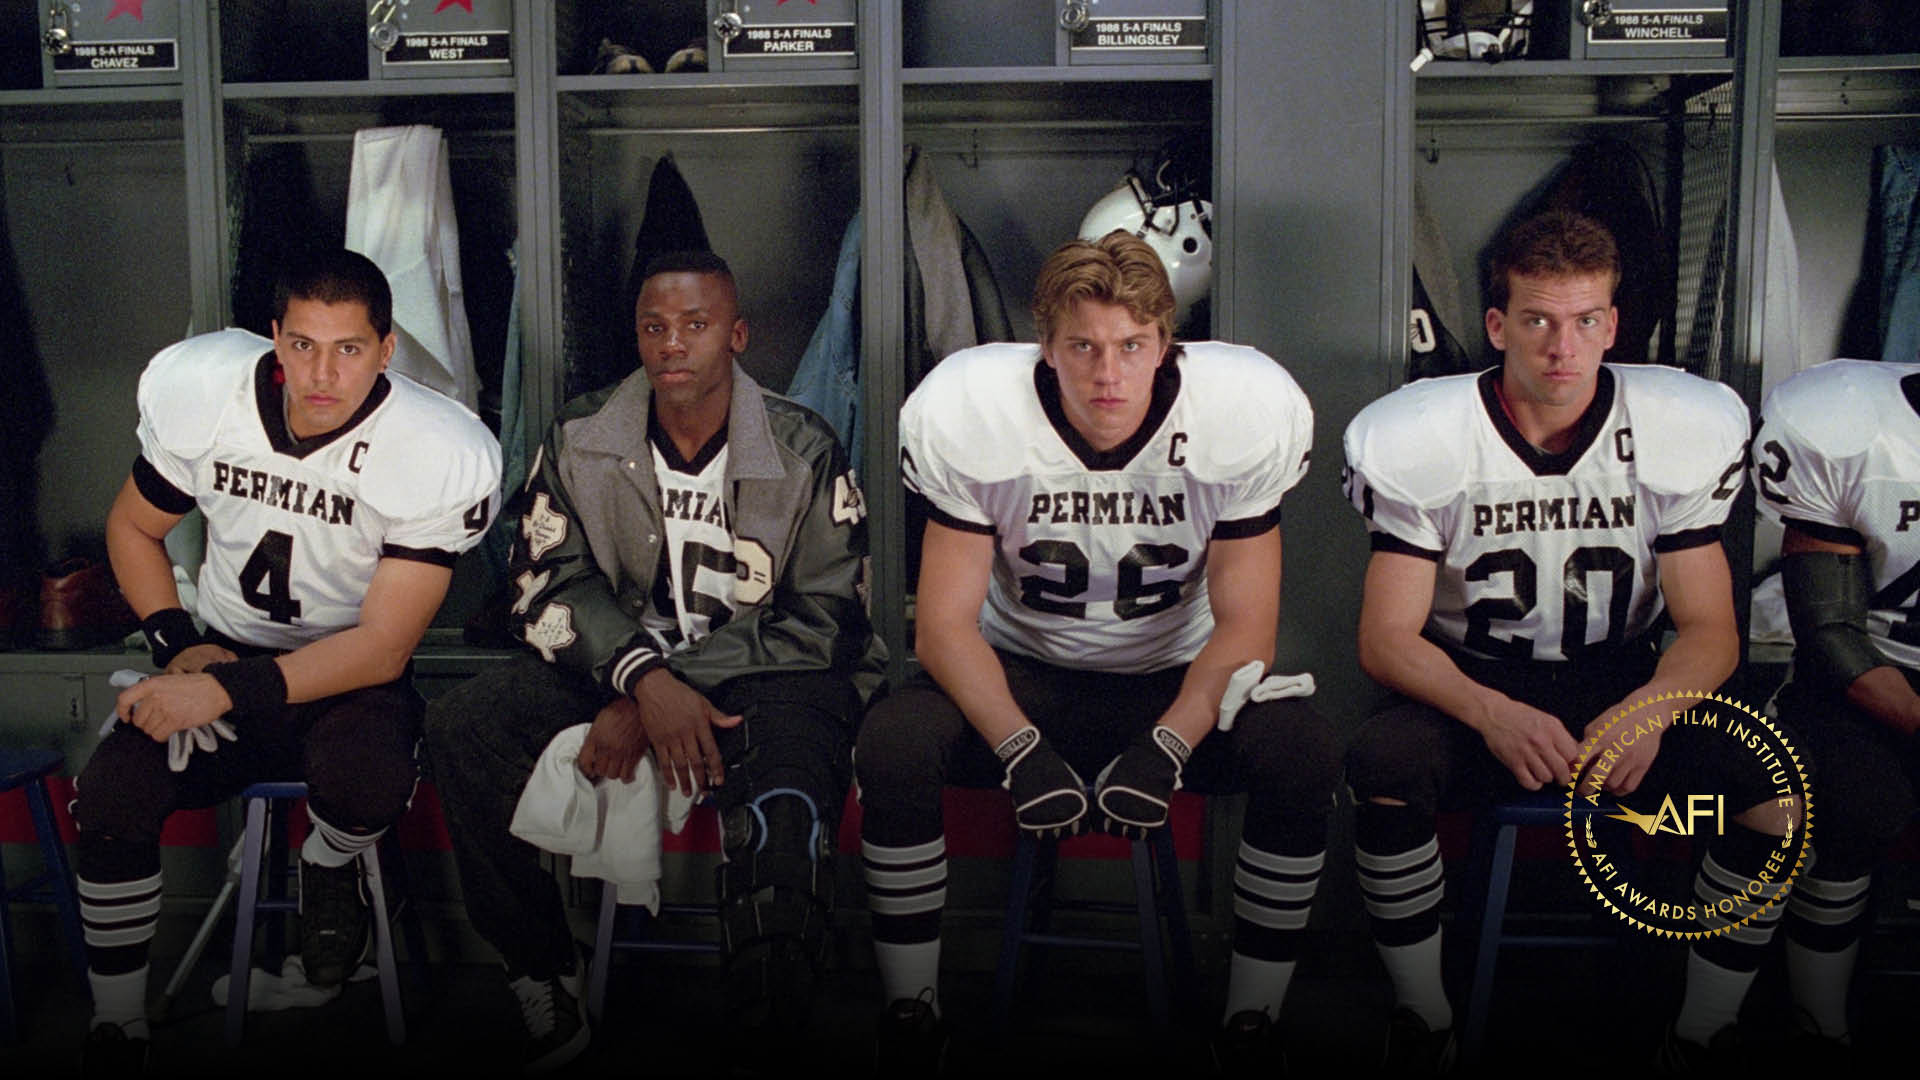 Image from the film FRIDAY NIGHT LIGHTS